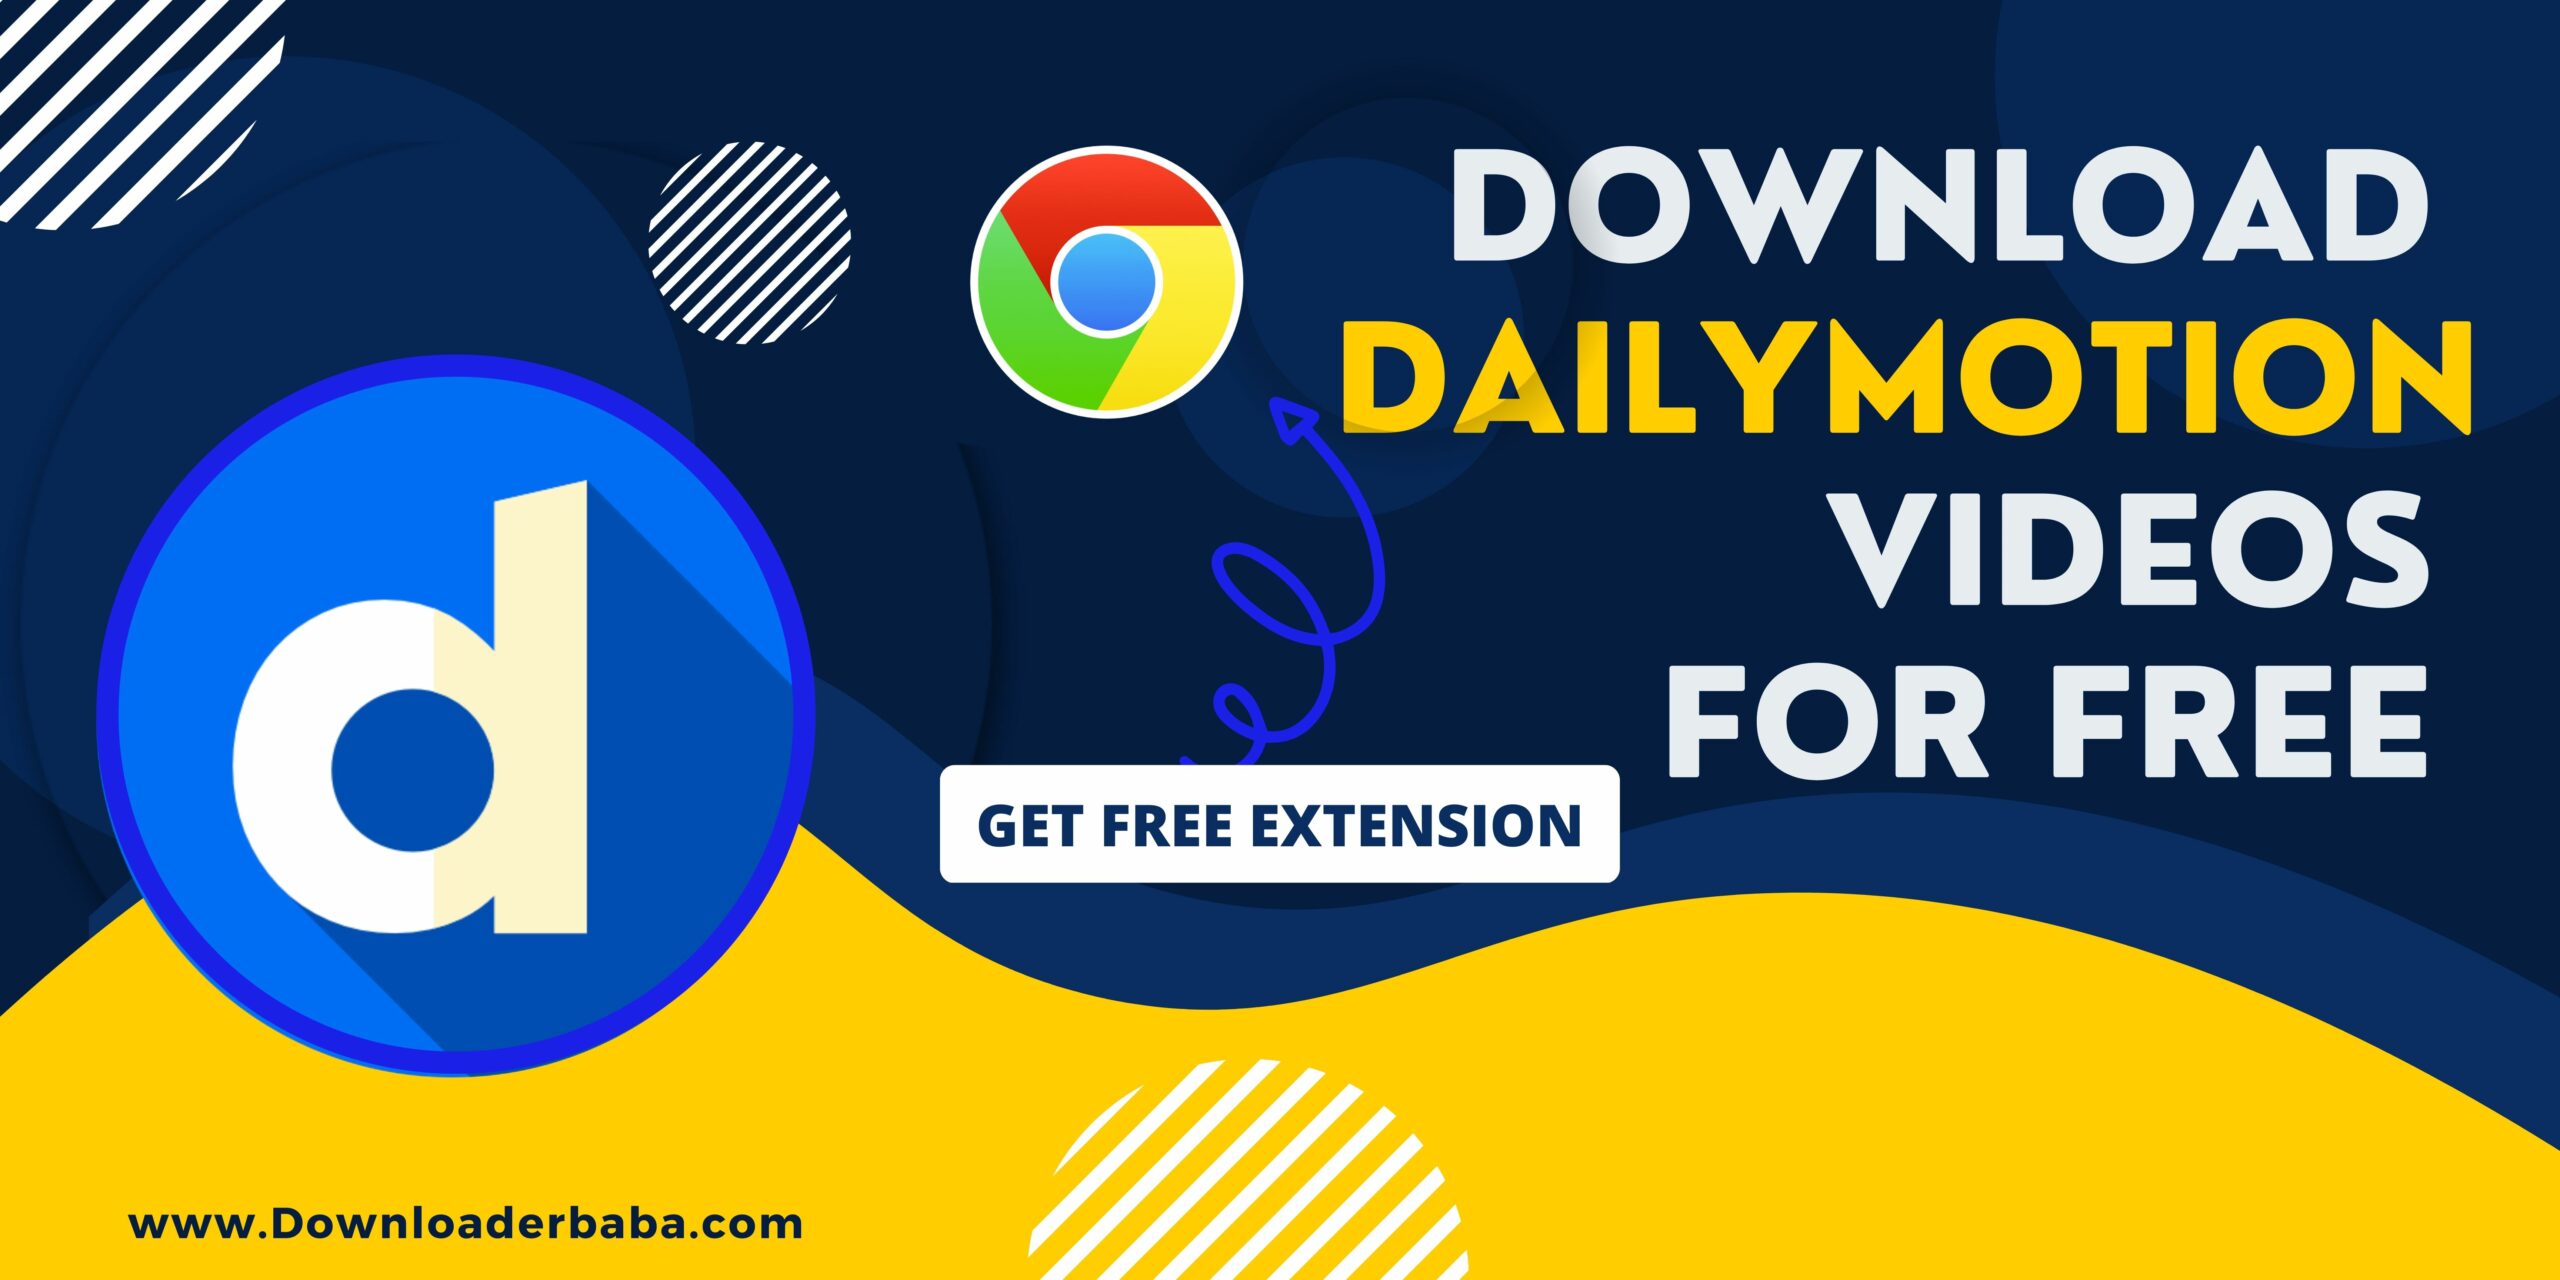 How to download dailymotion videos